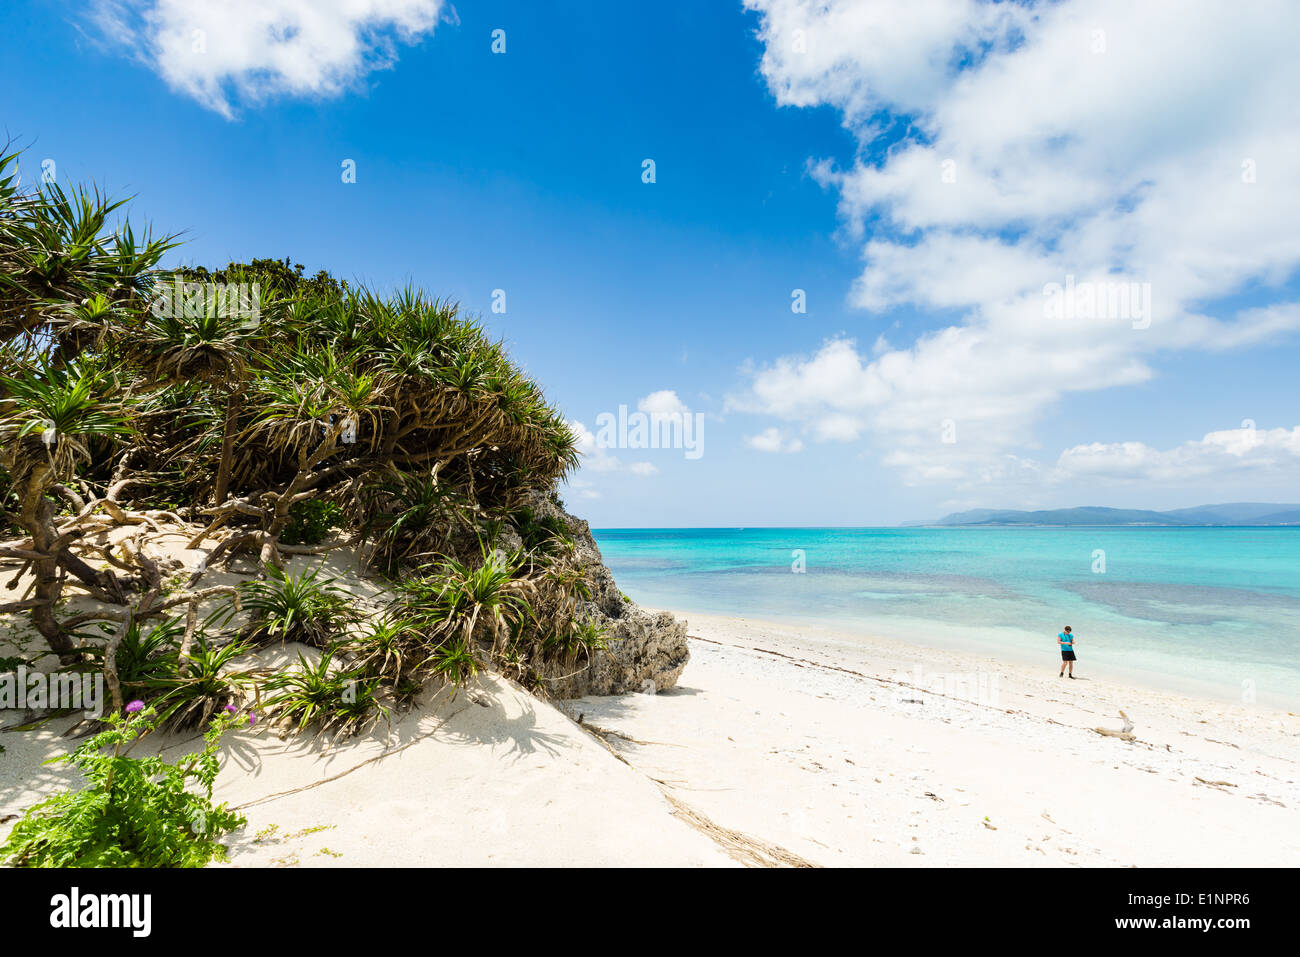 Man admiring perfect white sand beach surrounded by crystal clear tropical water of Okinawa, Japan Stock Photo